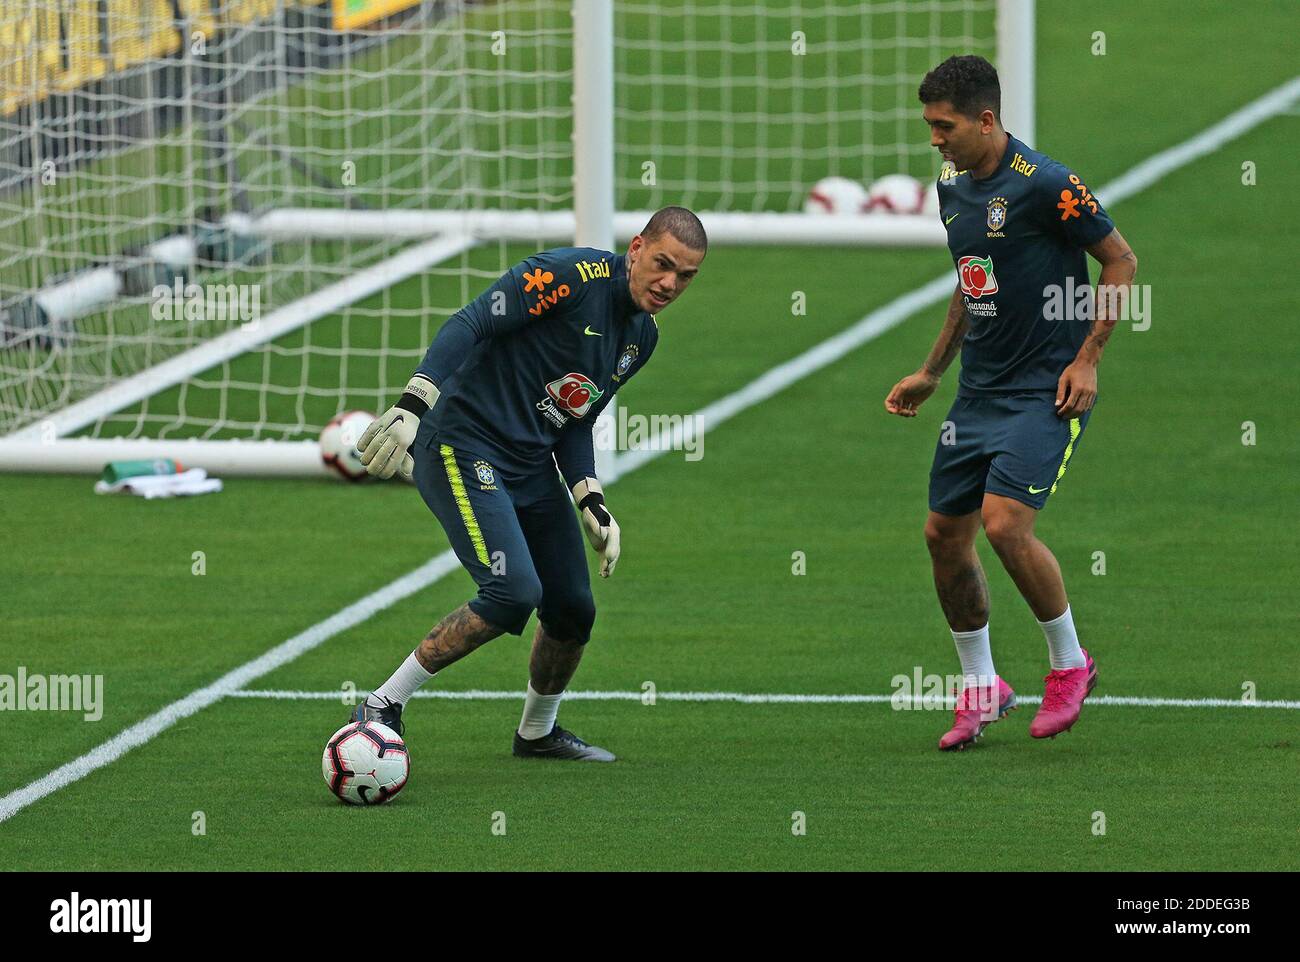 NO FILM, NO VIDEO, NO TV, NO DOCUMENTARY - Brazil national soccer team forward Firmino, right, and goalkeeper Ederson during practice on Thursday, Sept. 5, 2019, at Hard Rock Stadium in Miami Gardens, FL, USA, in preparation for international friendly against Colombia on Friday. Photo by David Santiago/Miami Herald/TNS/ABACAPRESS.COM Stock Photo